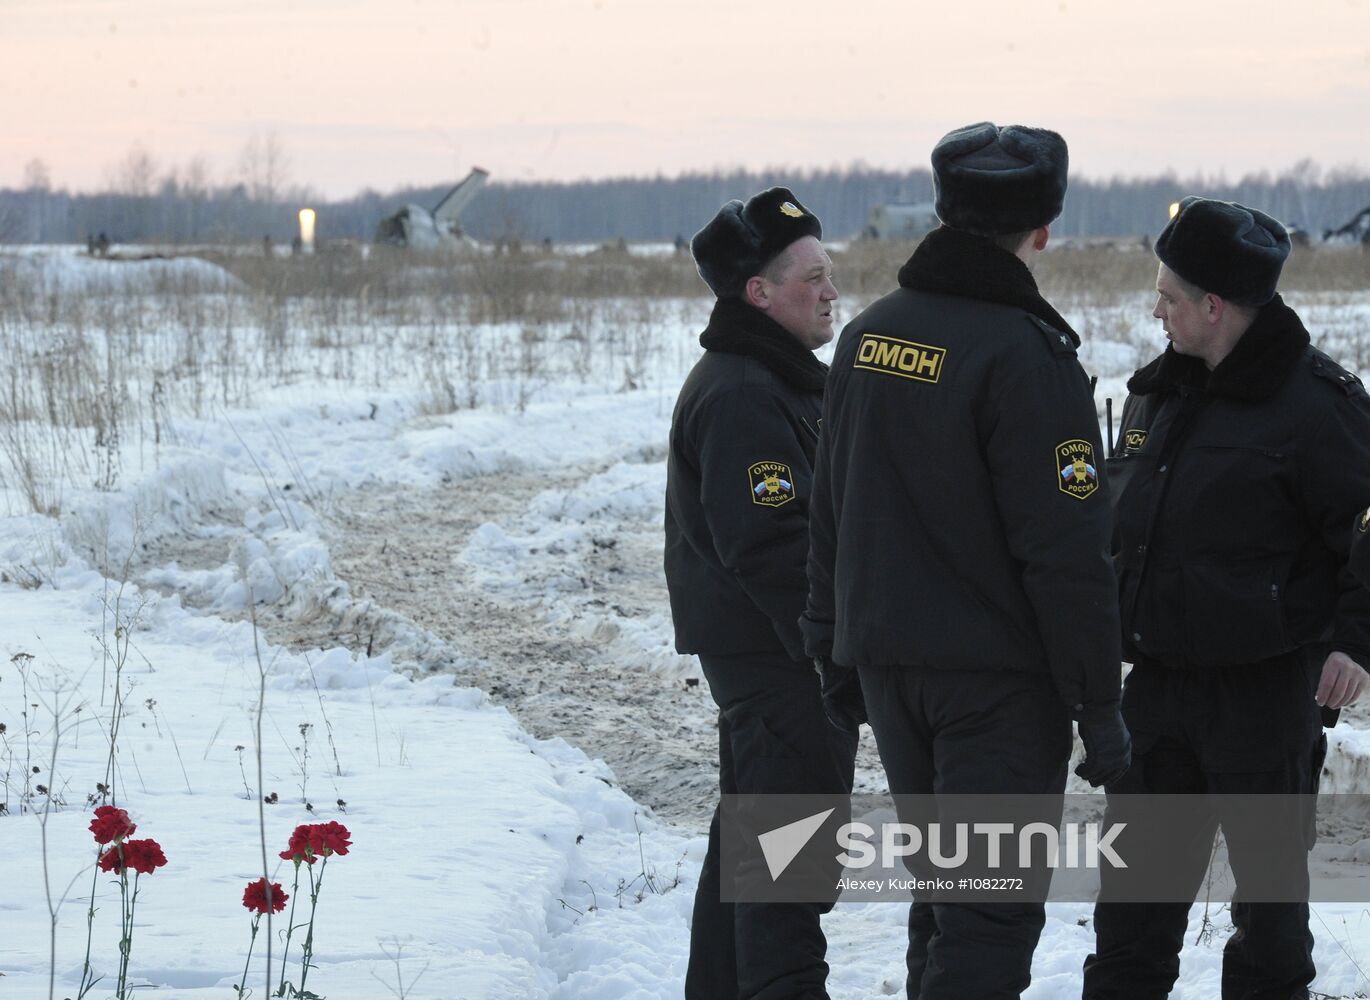 Situation at crash site of the ATR-72 airplane in Tyumen